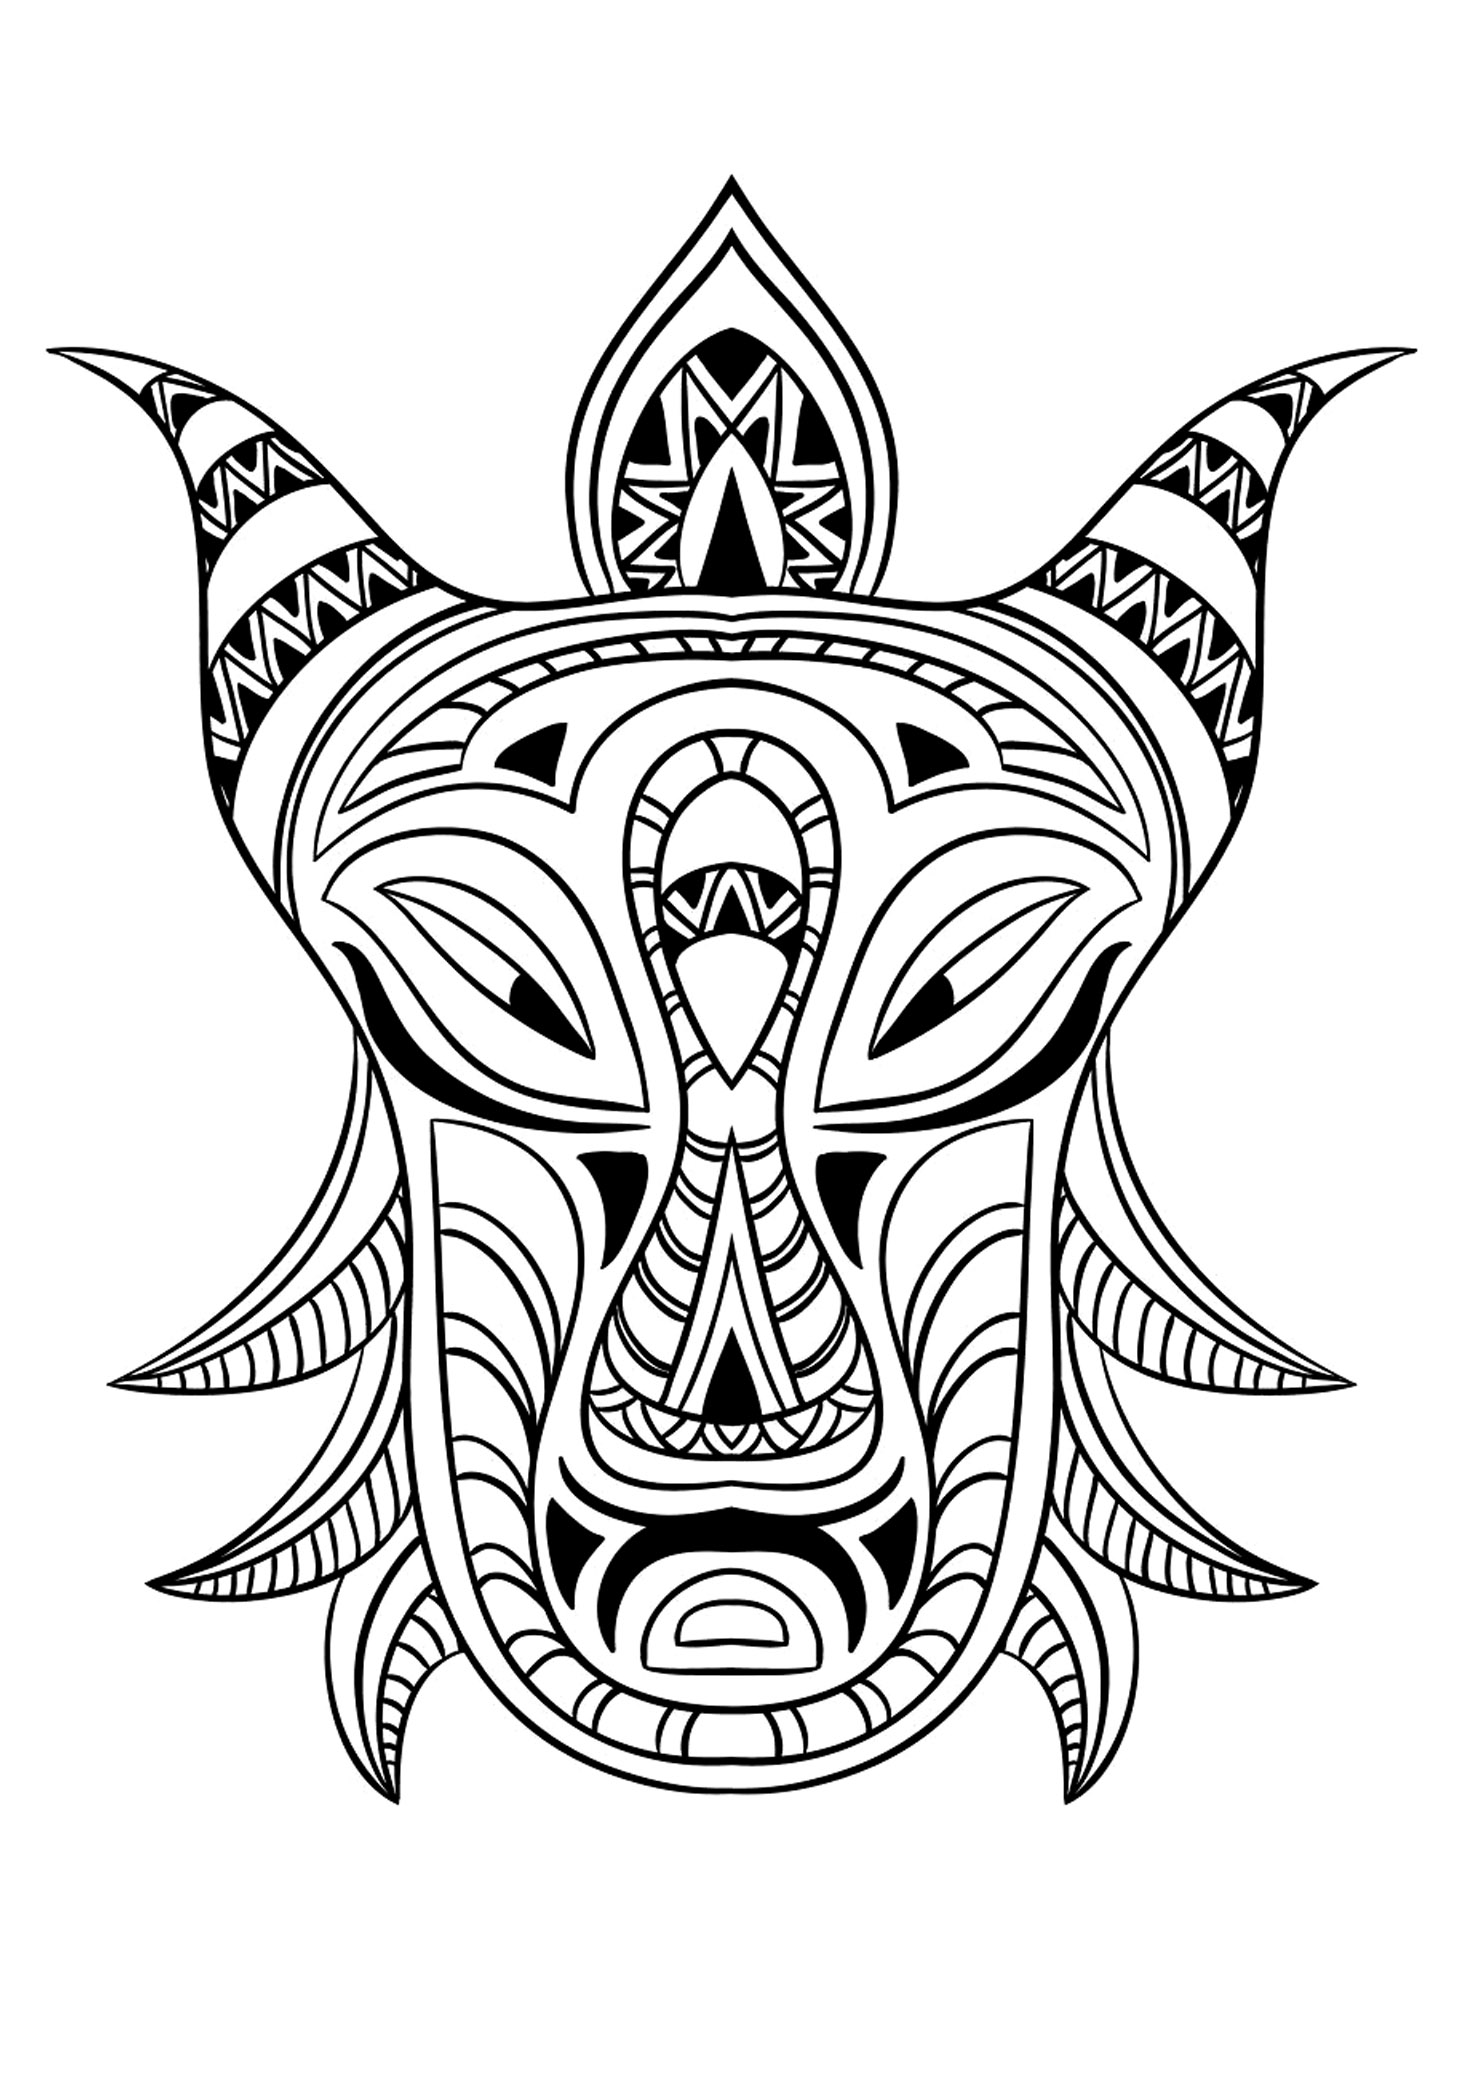 Coloring picture of an African mask - 3